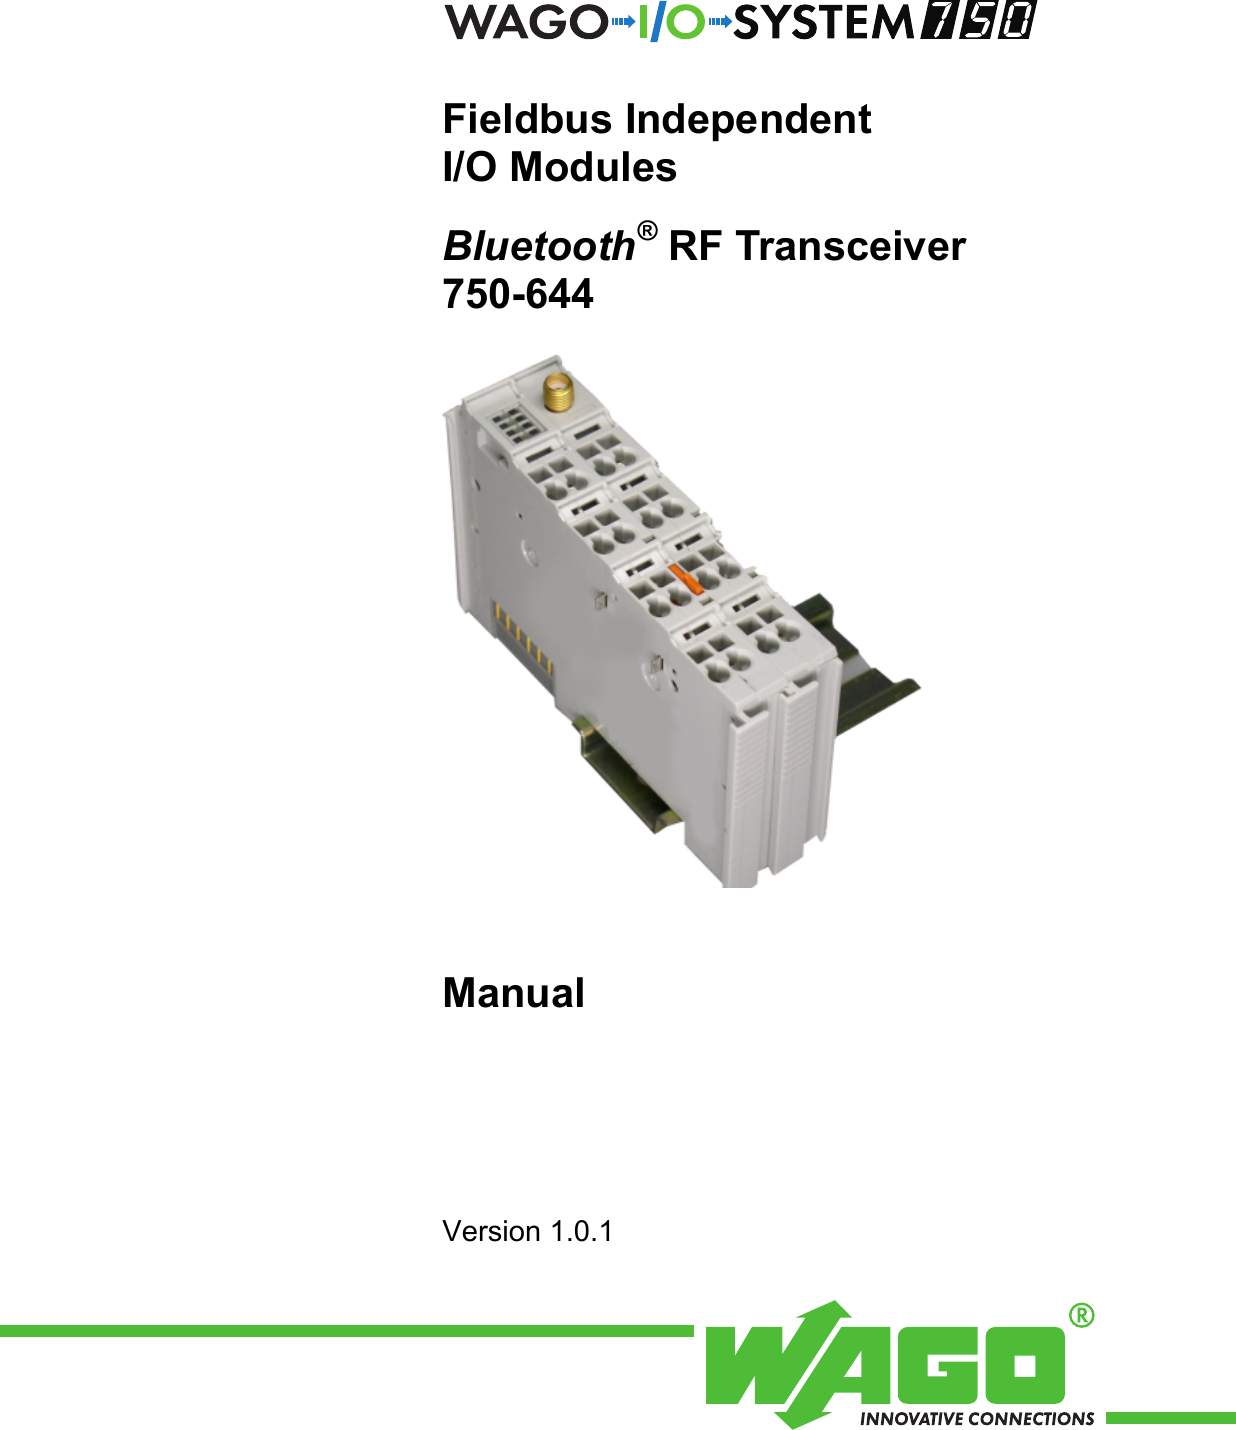   Fieldbus Independent I/O Modules Bluetooth® RF Transceiver 750-644 Manual  Version 1.0.1  